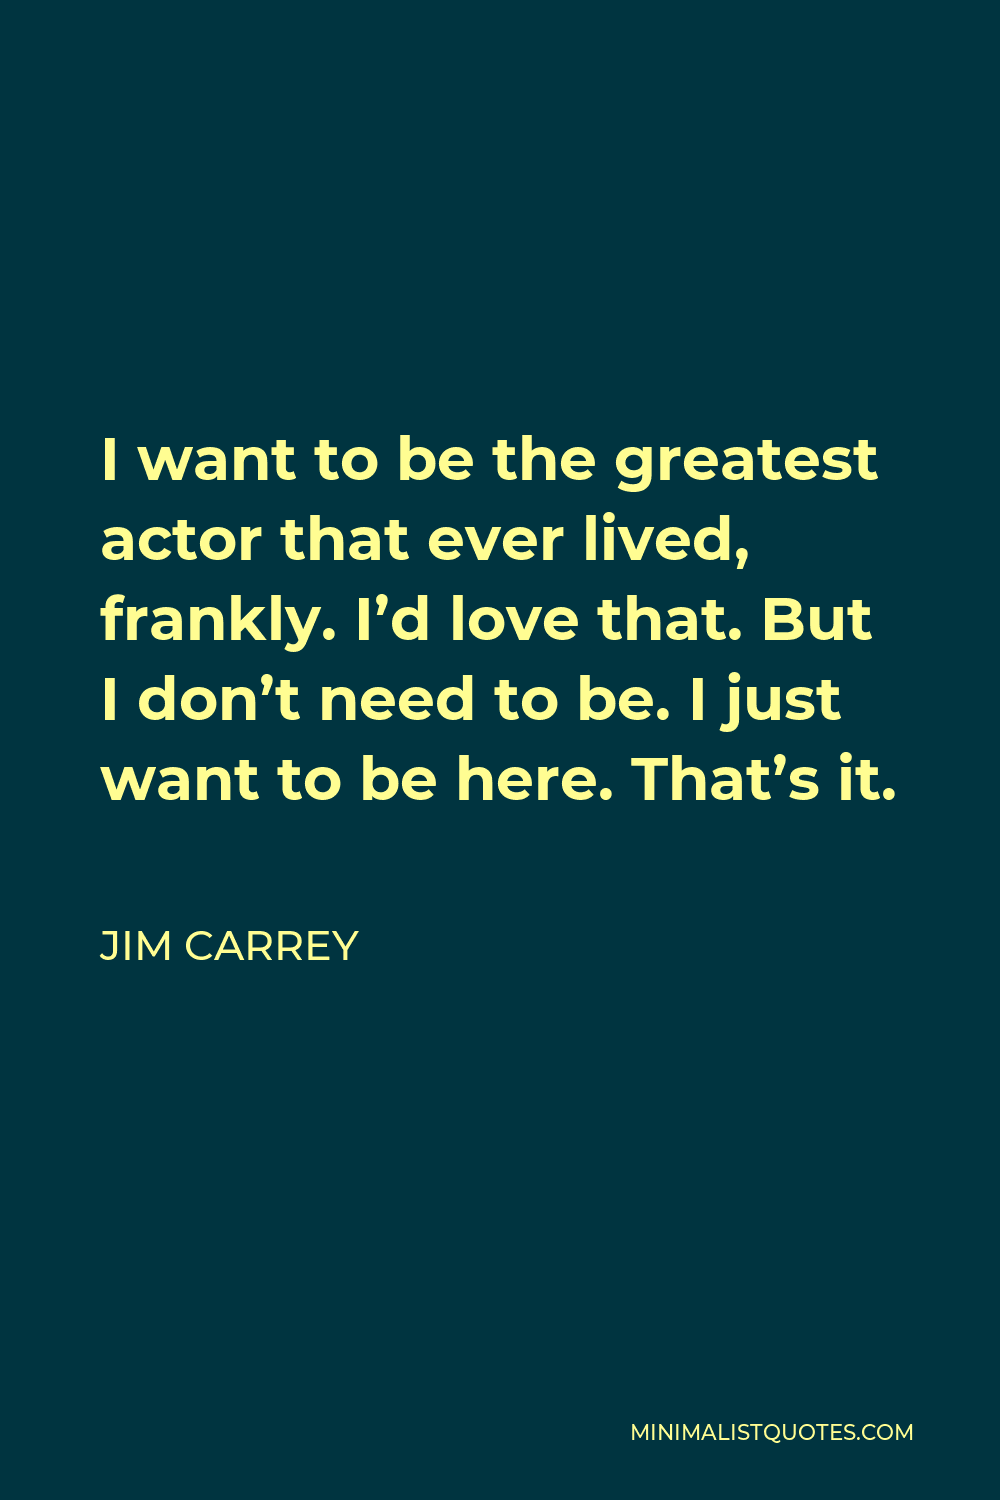 Jim Carrey Quote - I want to be the greatest actor that ever lived, frankly. I’d love that. But I don’t need to be. I just want to be here. That’s it.